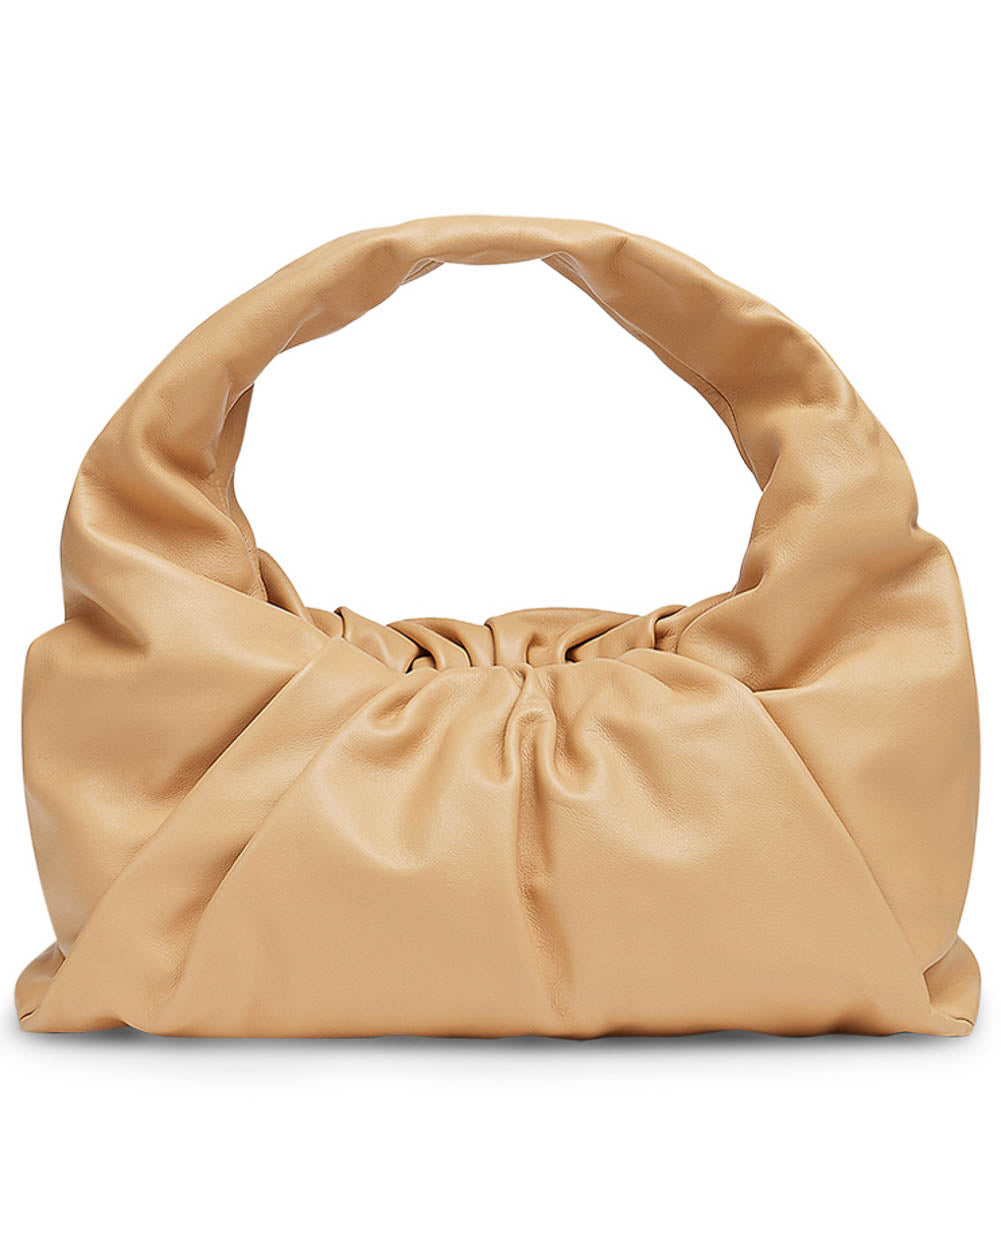 The Shoulder Pouch in Almond